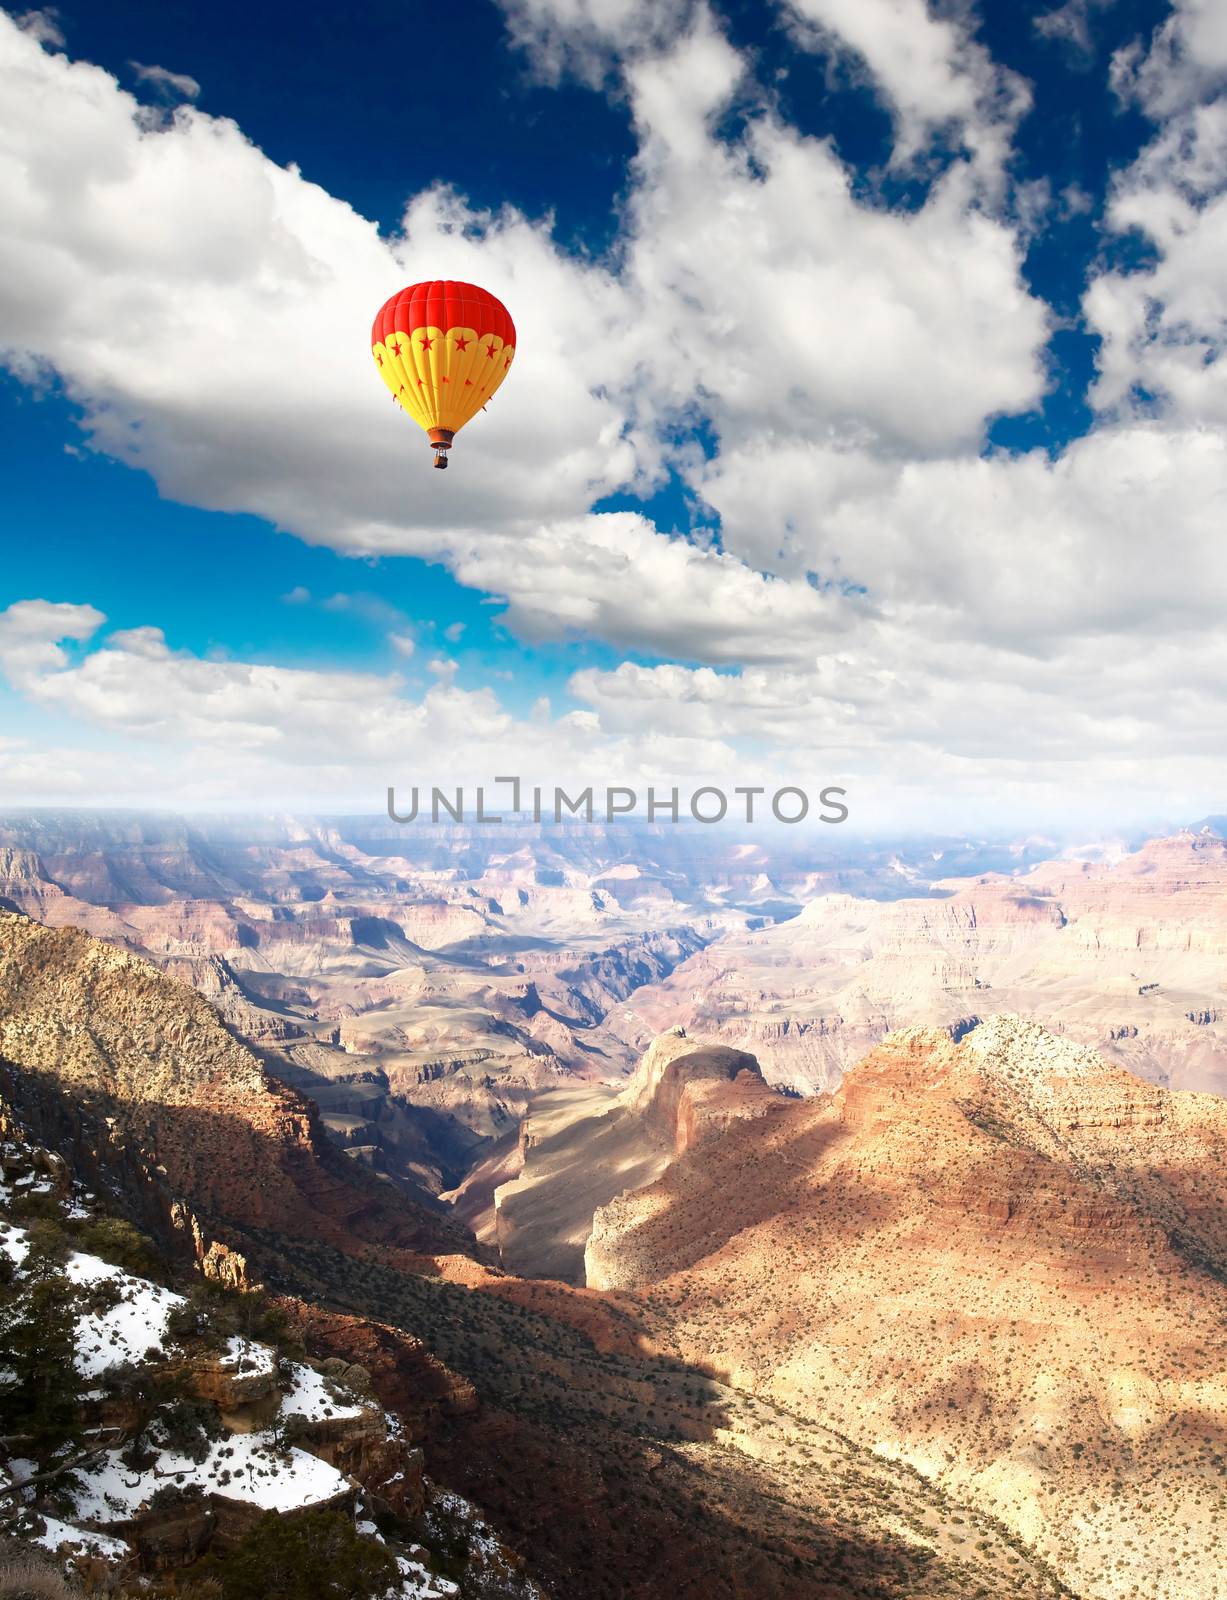 Grand Canyon National Park in Arizona by gary718